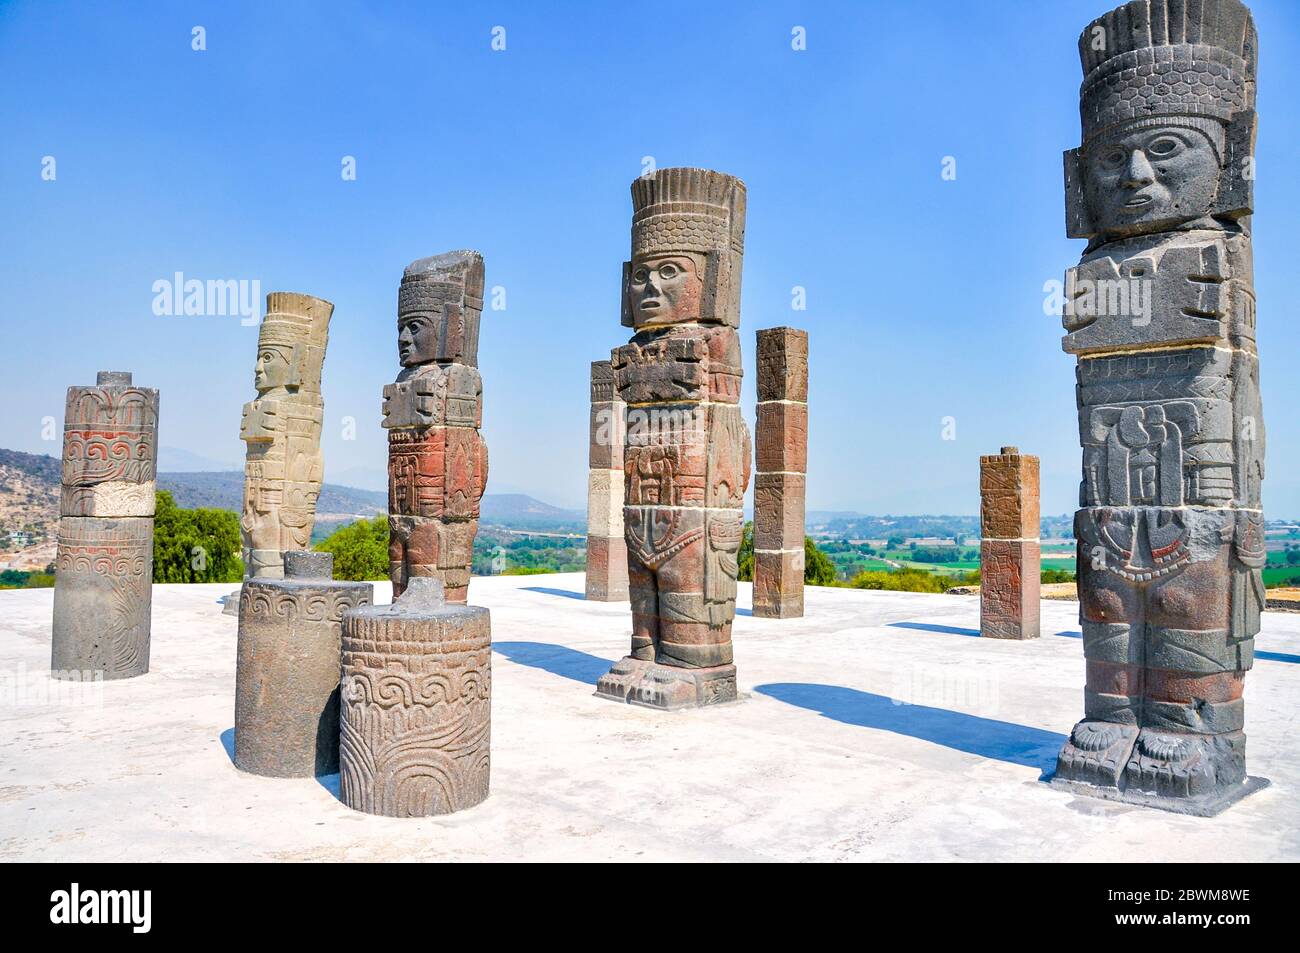 Tula, Mexico. View of Pyramid of Quetzalcoatl with Toltec Warriors columns in ceremonial site called Tula Grande, Mexico Stock Photo